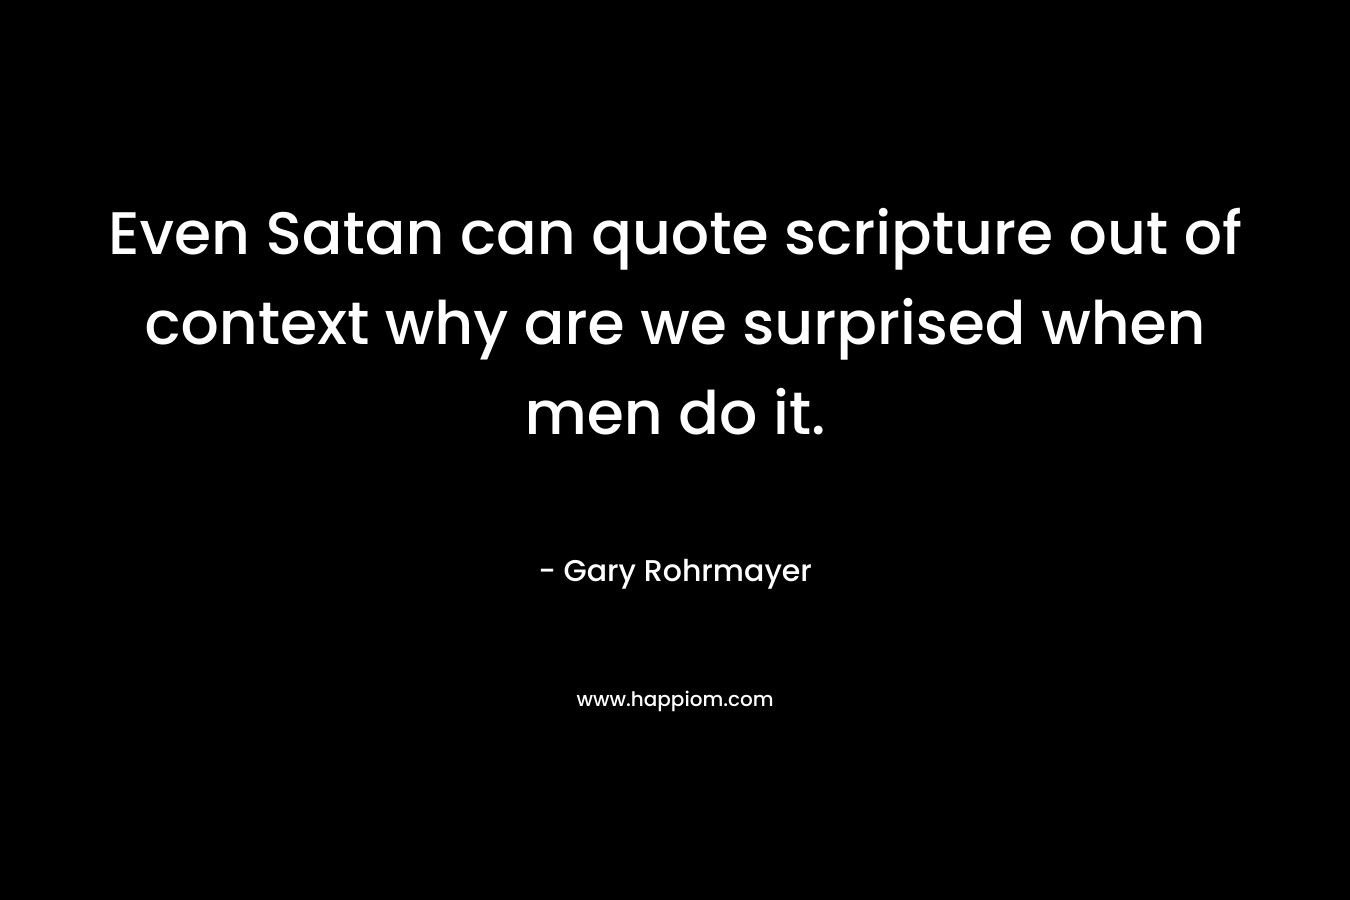 Even Satan can quote scripture out of context why are we surprised when men do it.